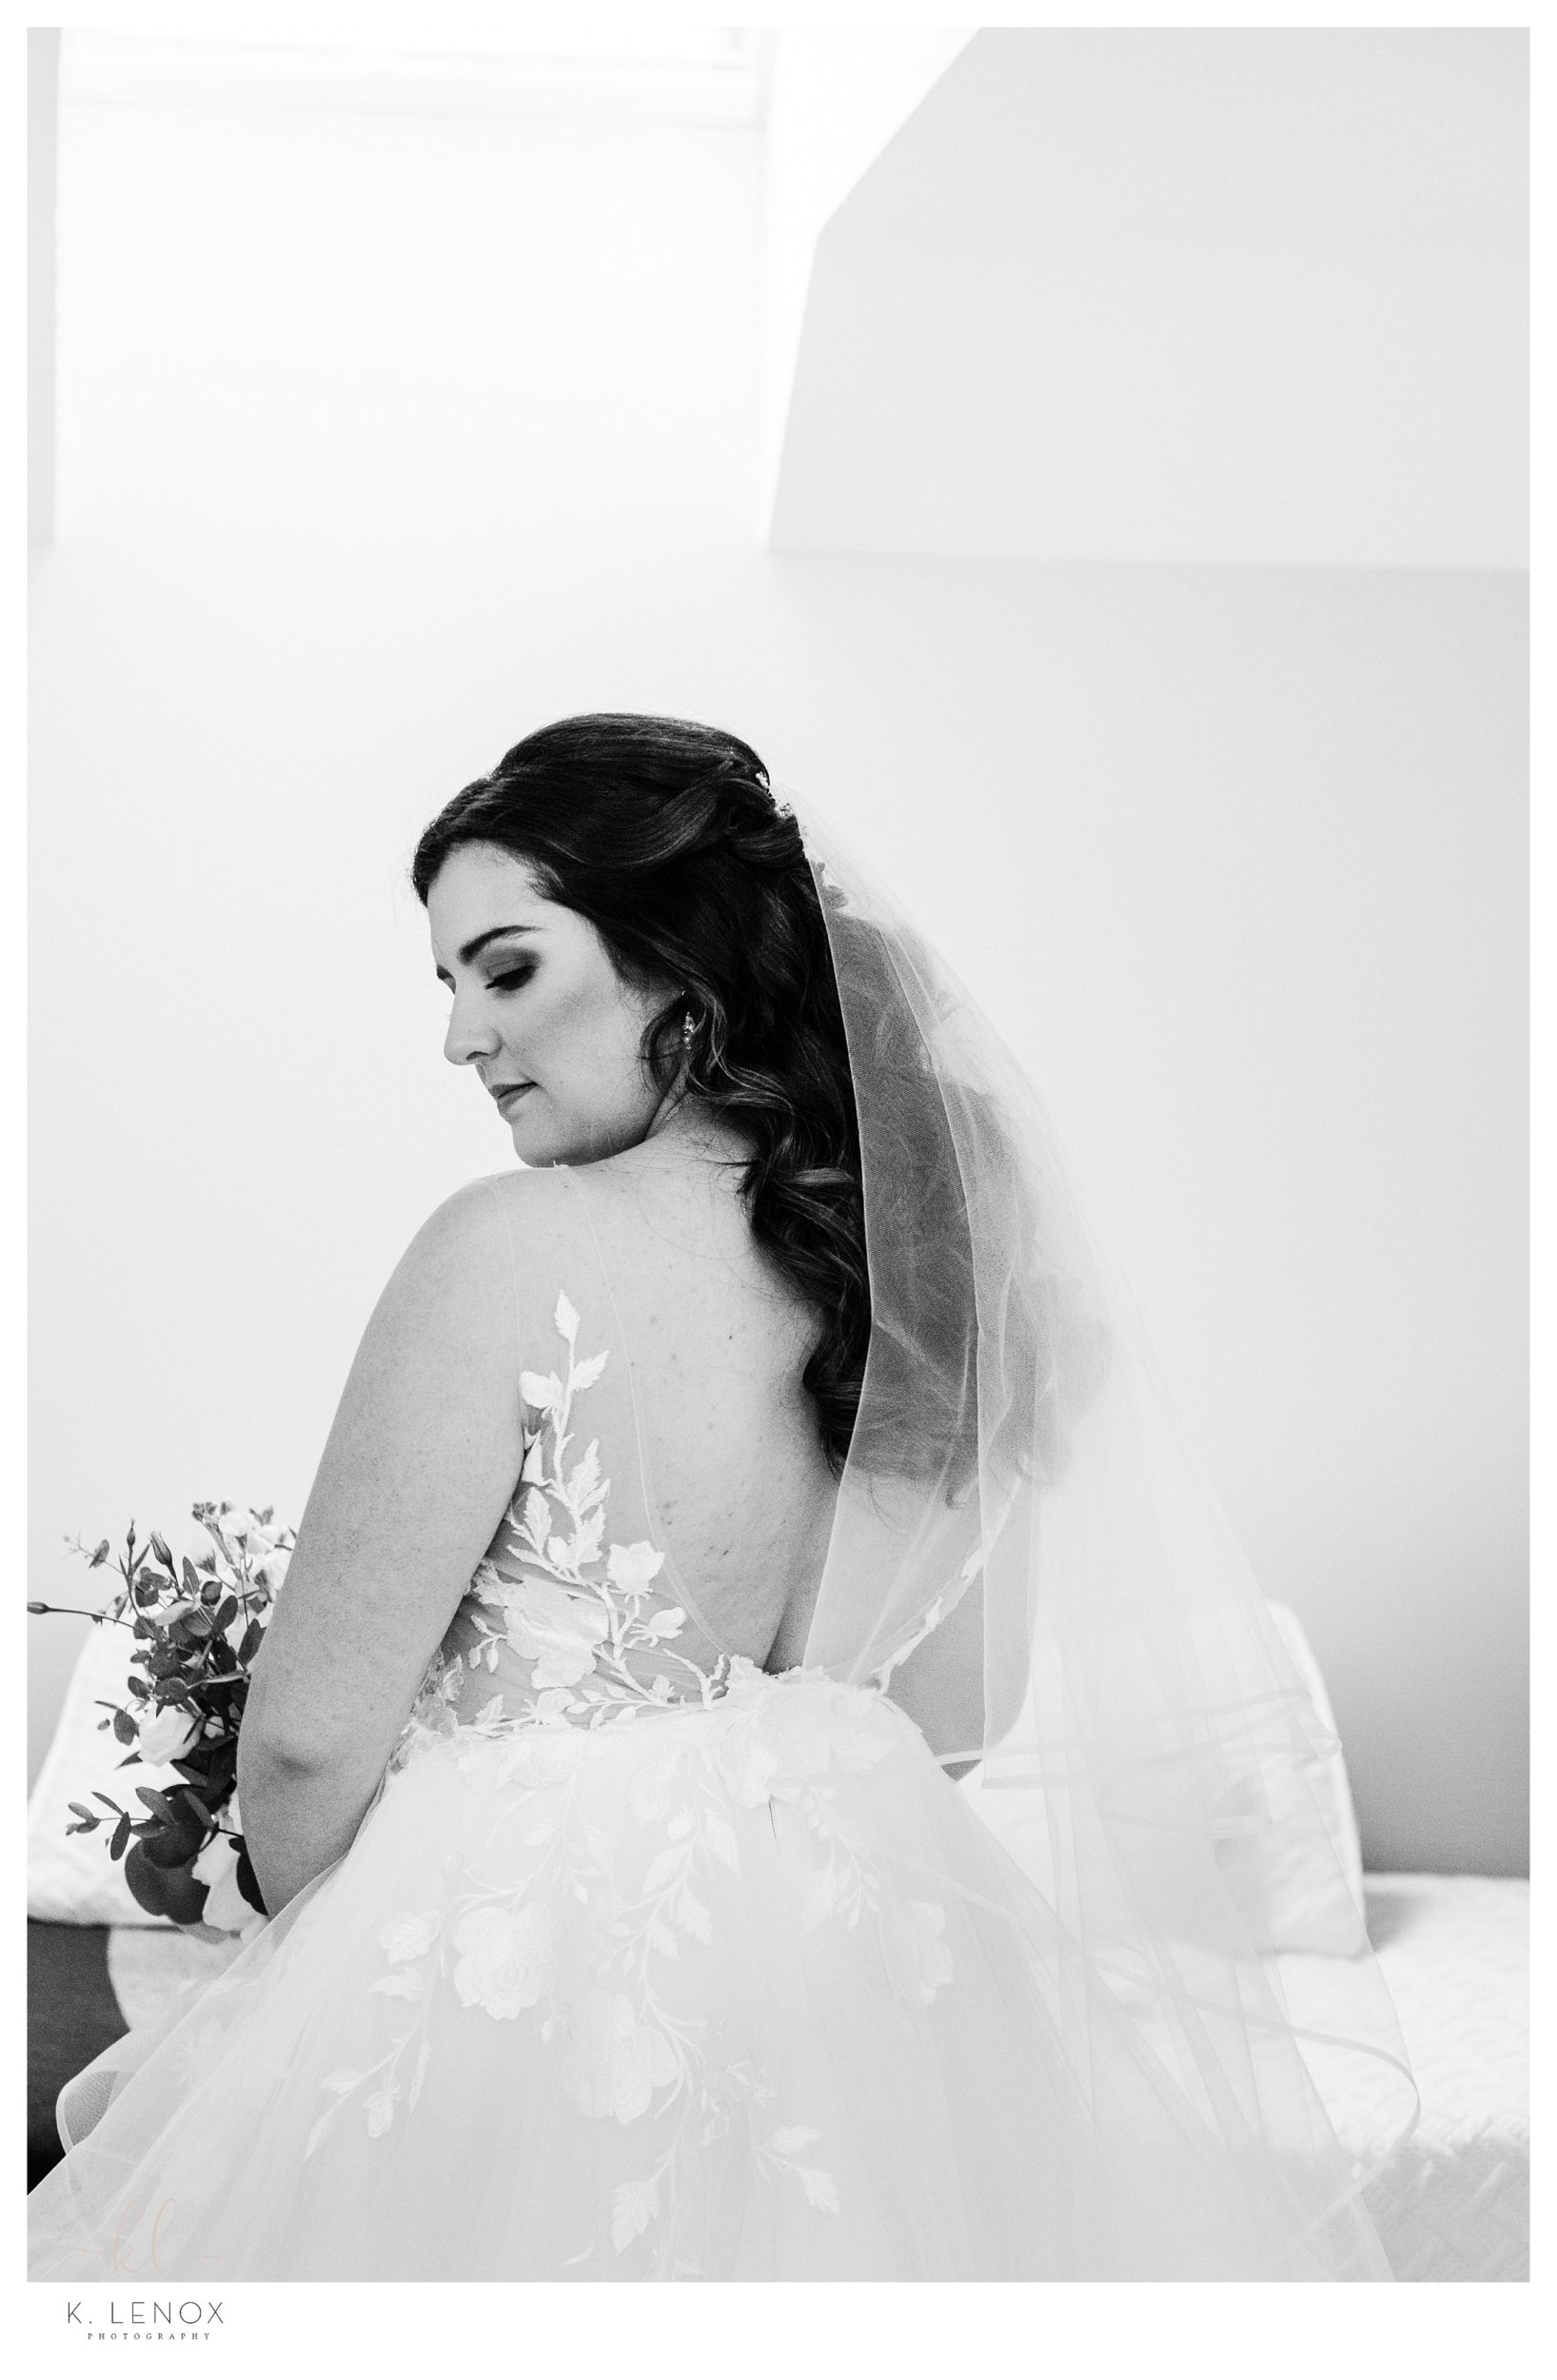 Beautiful Backyard Micro Wedding -  Black and White photo of a bride on her wedding day. 